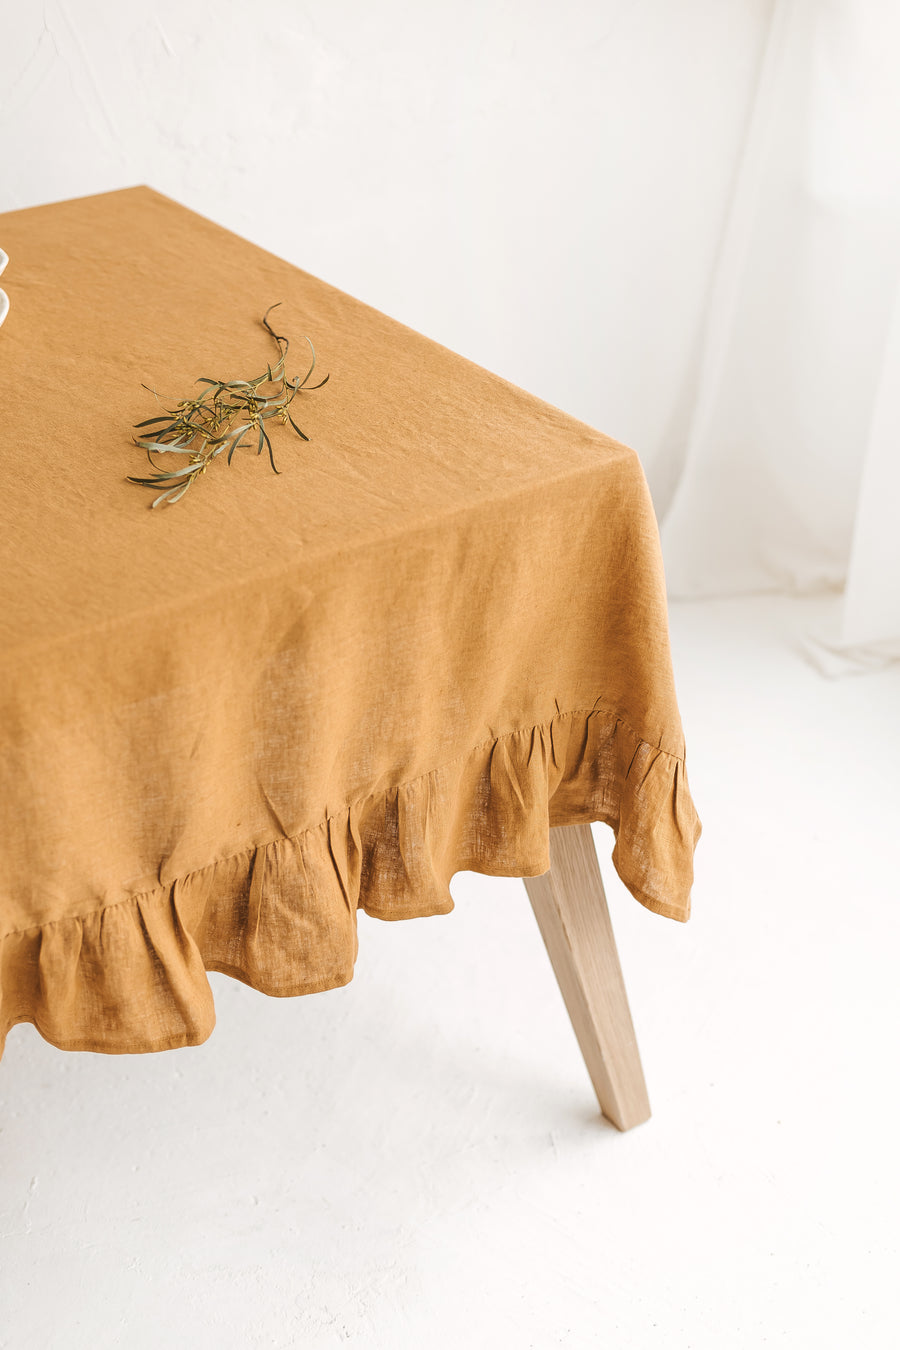 White Linen Tablecloth With Ruffle